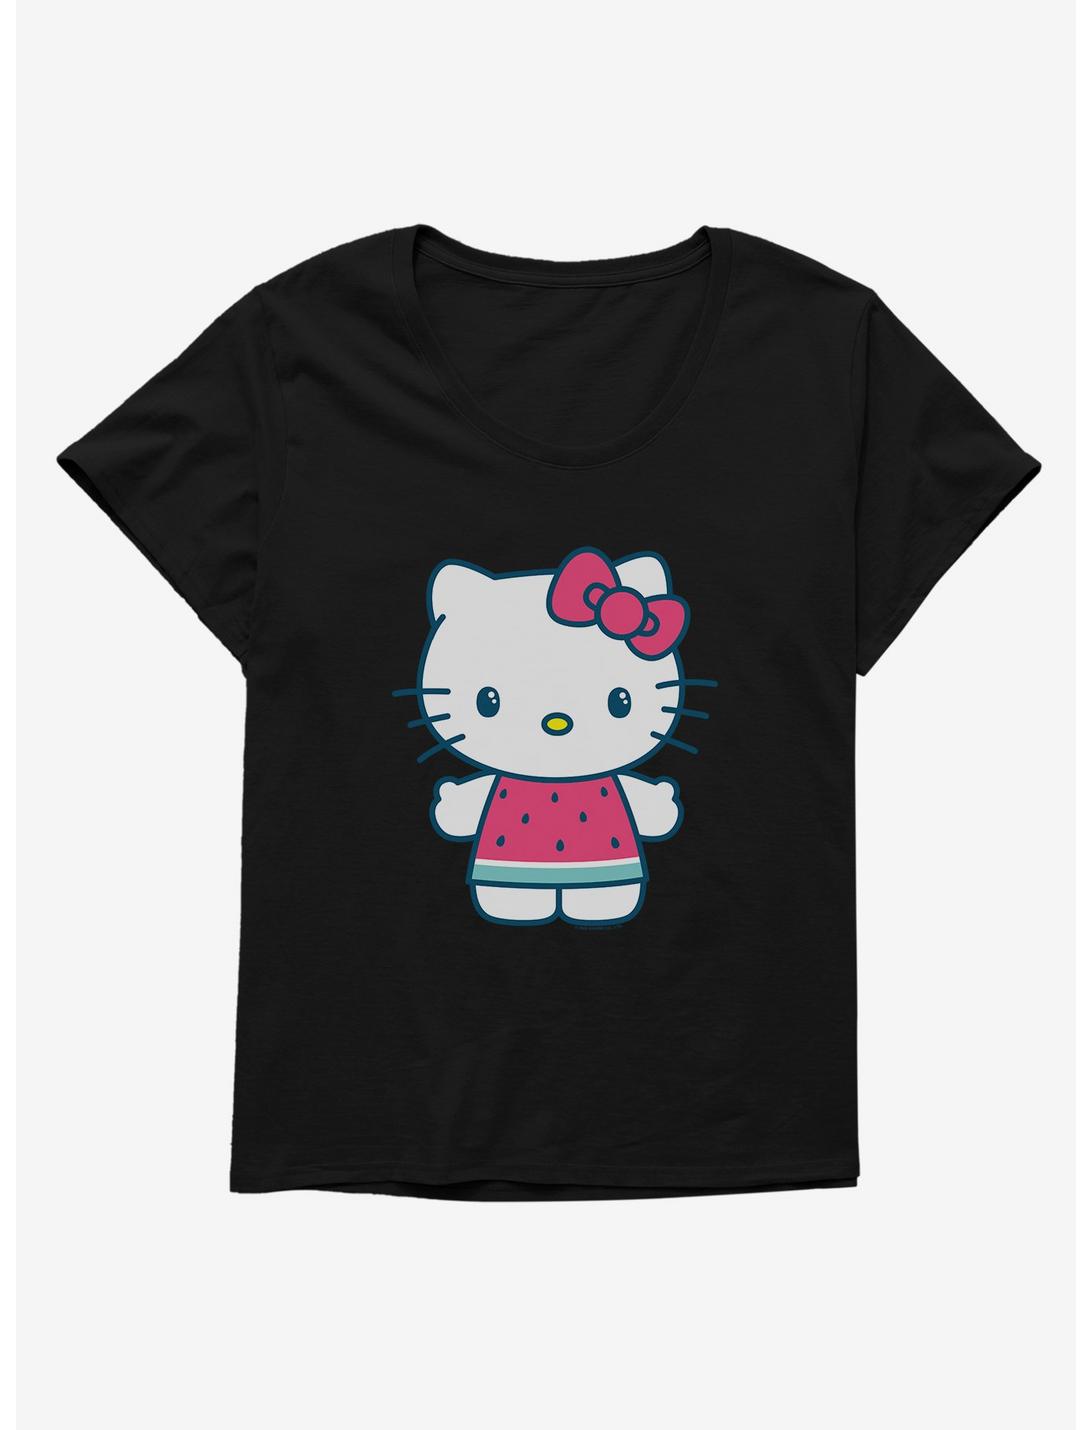 Hello Kitty Kawaii Vacation Watermelon Outfit Womens T-Shirt Plus Size, , hi-res